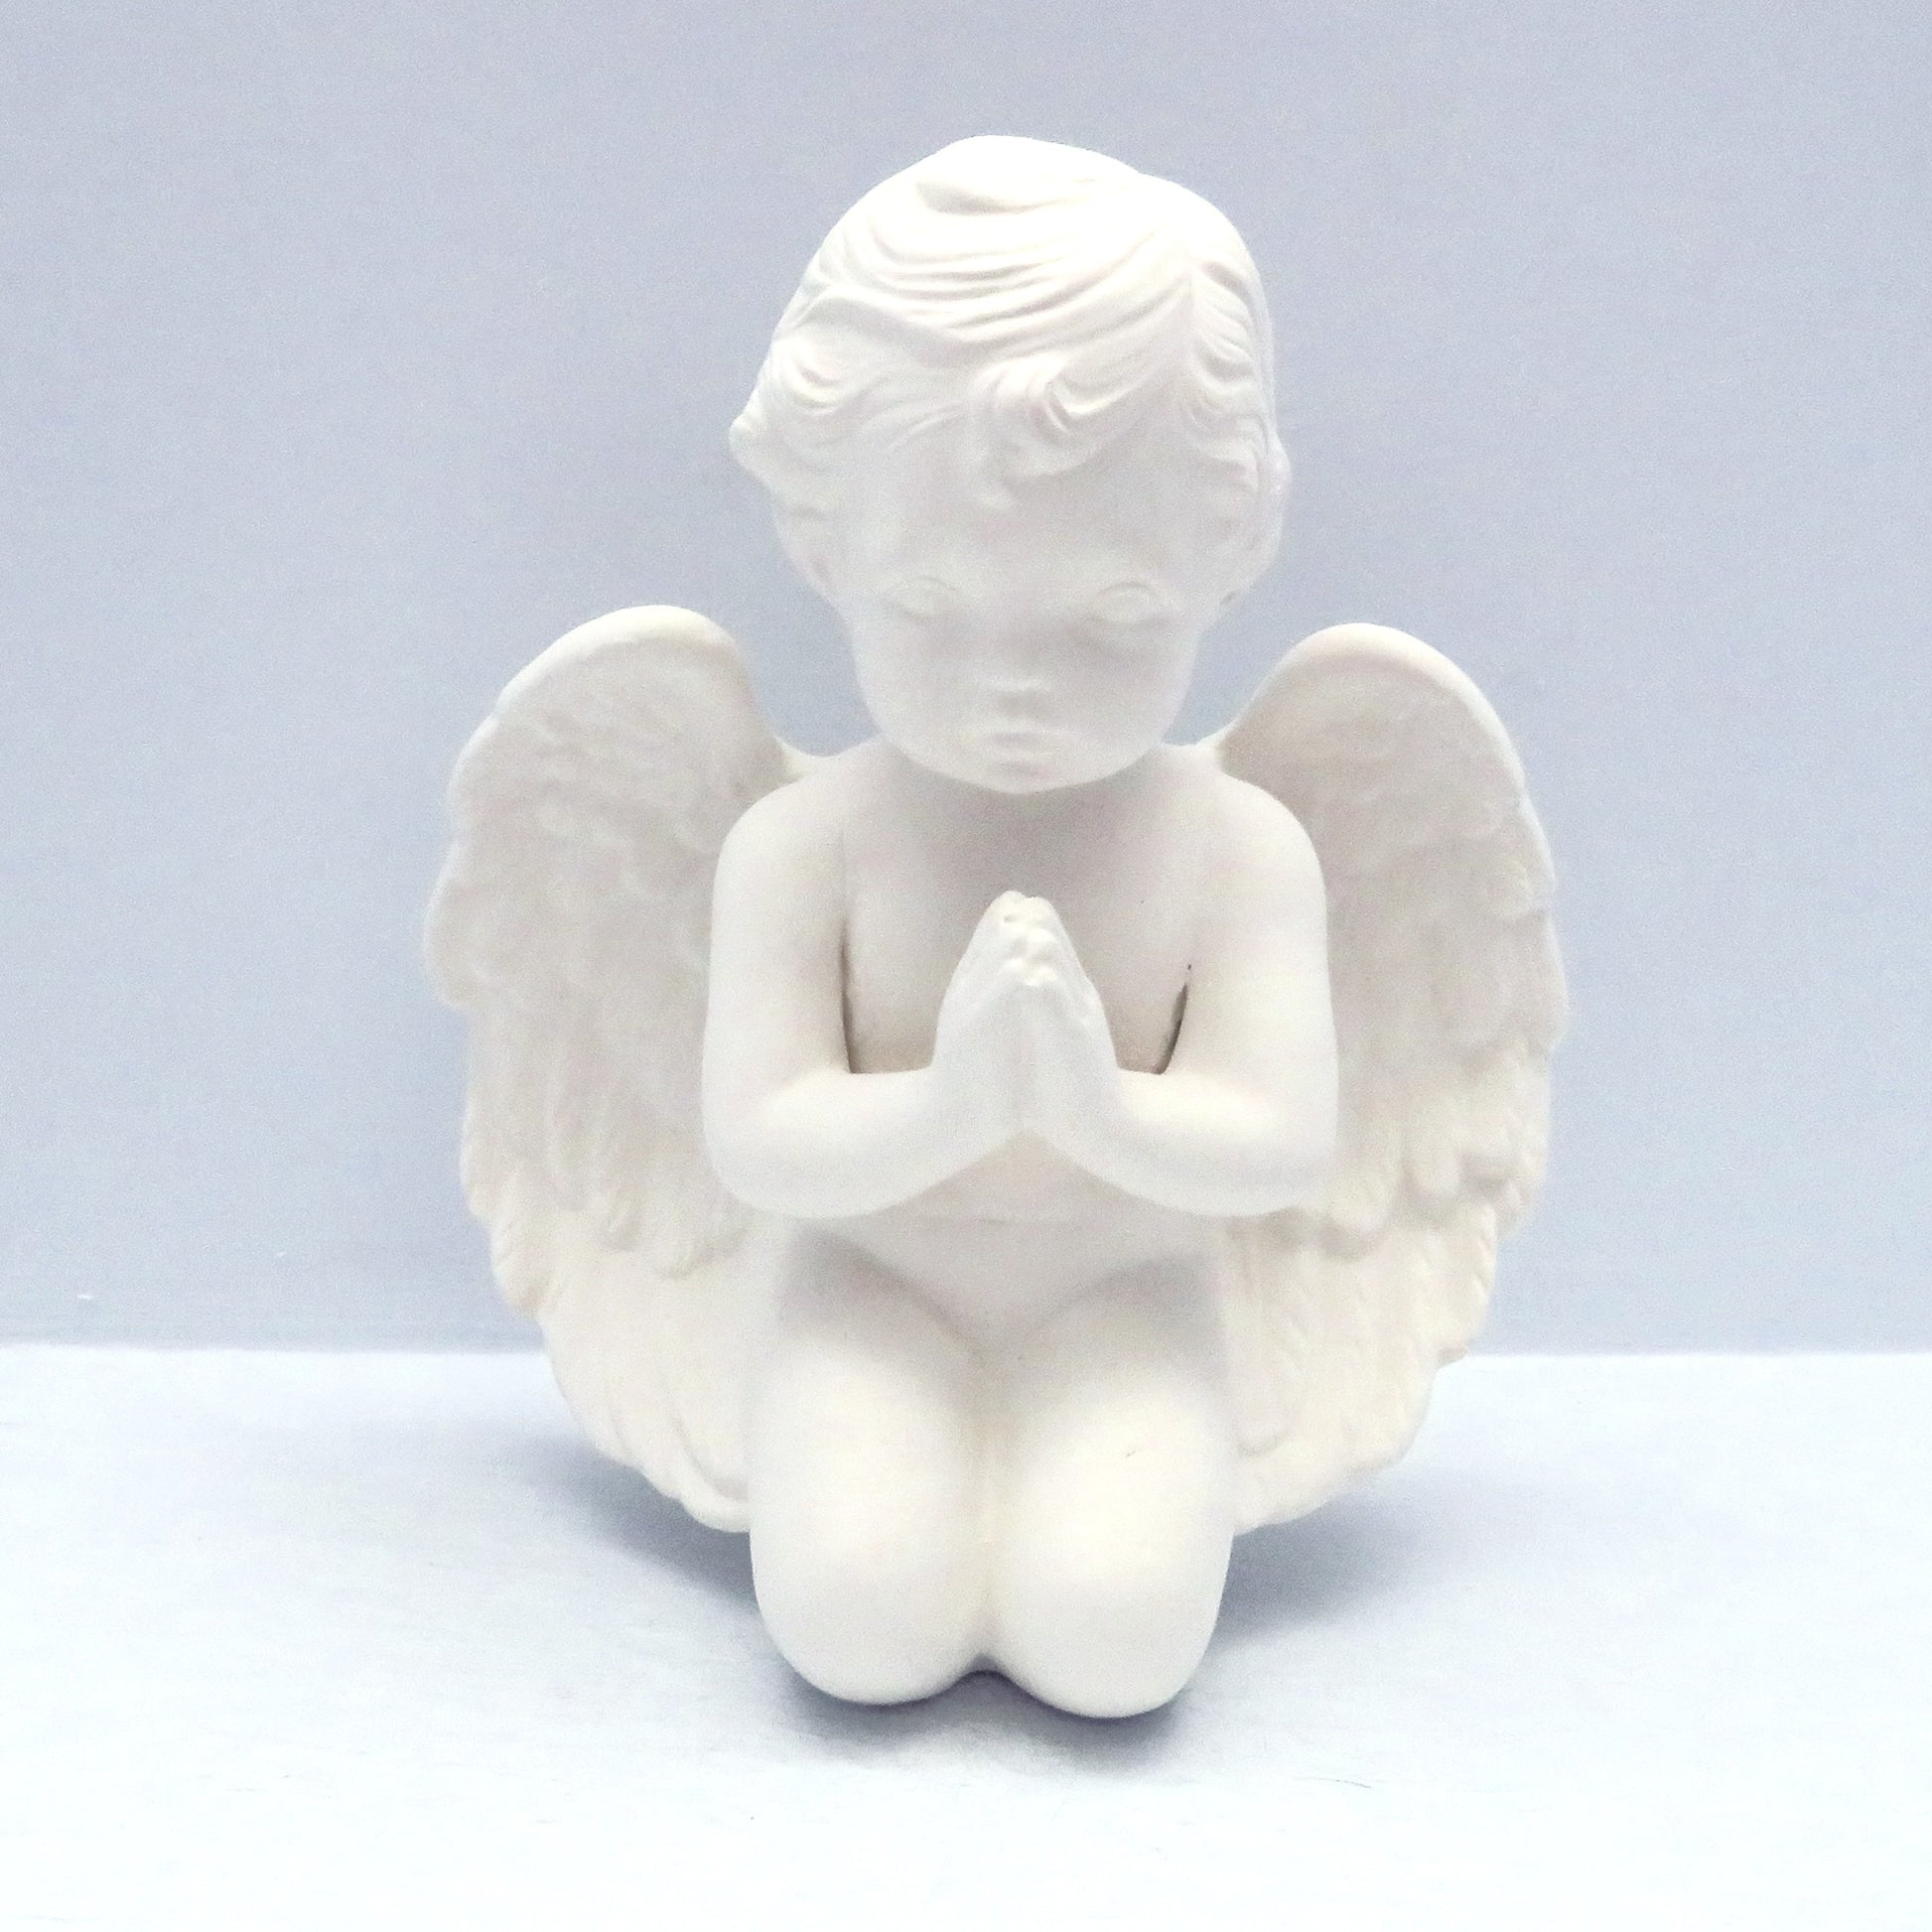 6 inch handmade ready to paint ceramic cherub angel figurine kneeling with his hands in the prayer position and its head bowed.  It is on a pale blue background